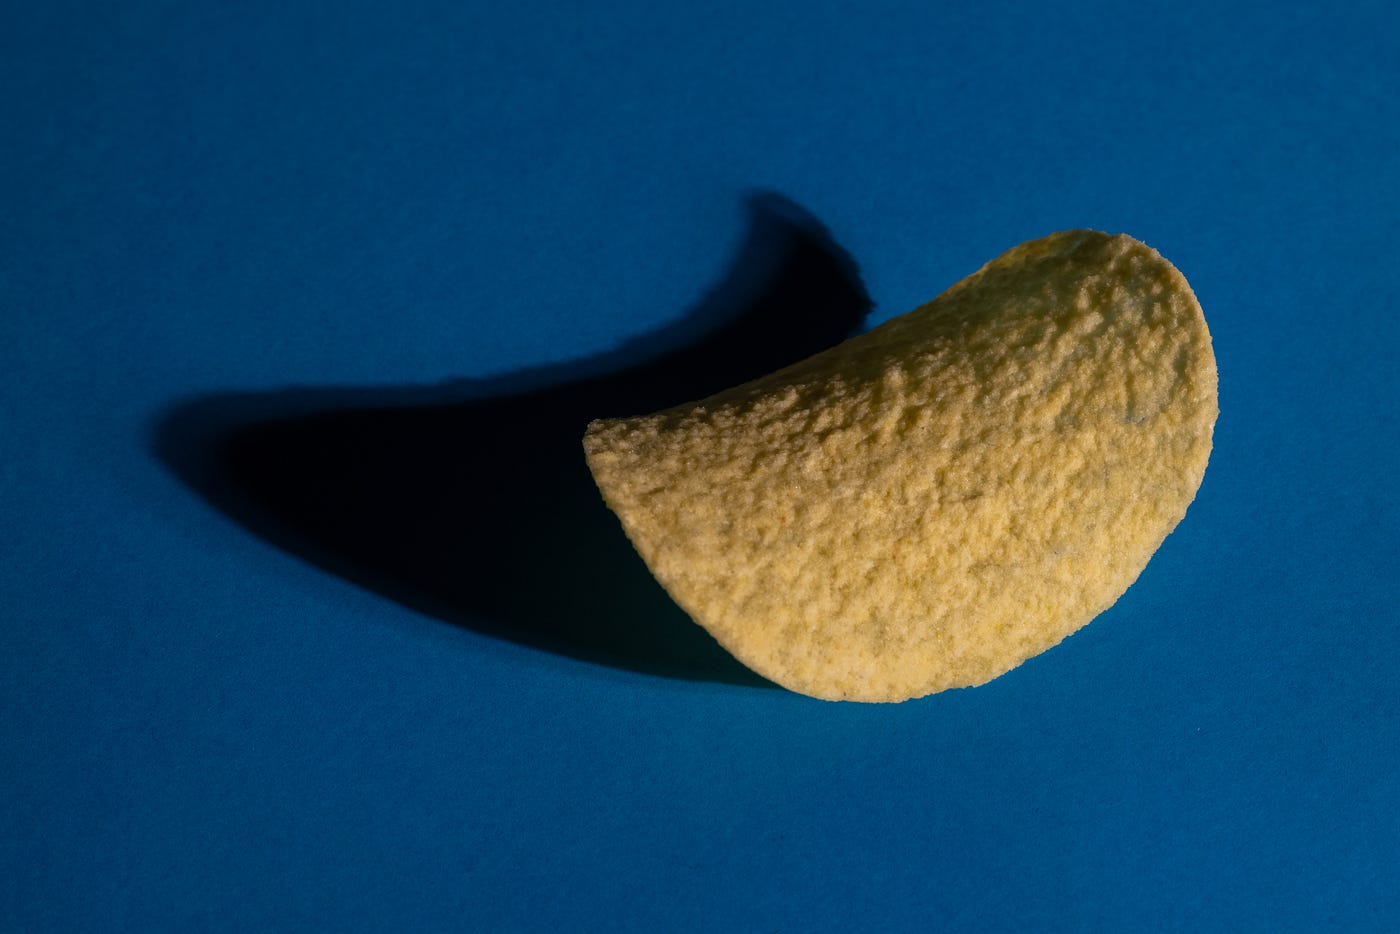 A single Pringles potato chip. Dark blue background. Ultra-processed foods are high in added sugar, oils, fats, and refined starch. These substances can impact the gut microbiome composition unfavorably. Moreover, processed foods increase weight gain and obesity risks, known risk factors for colorectal cancer.